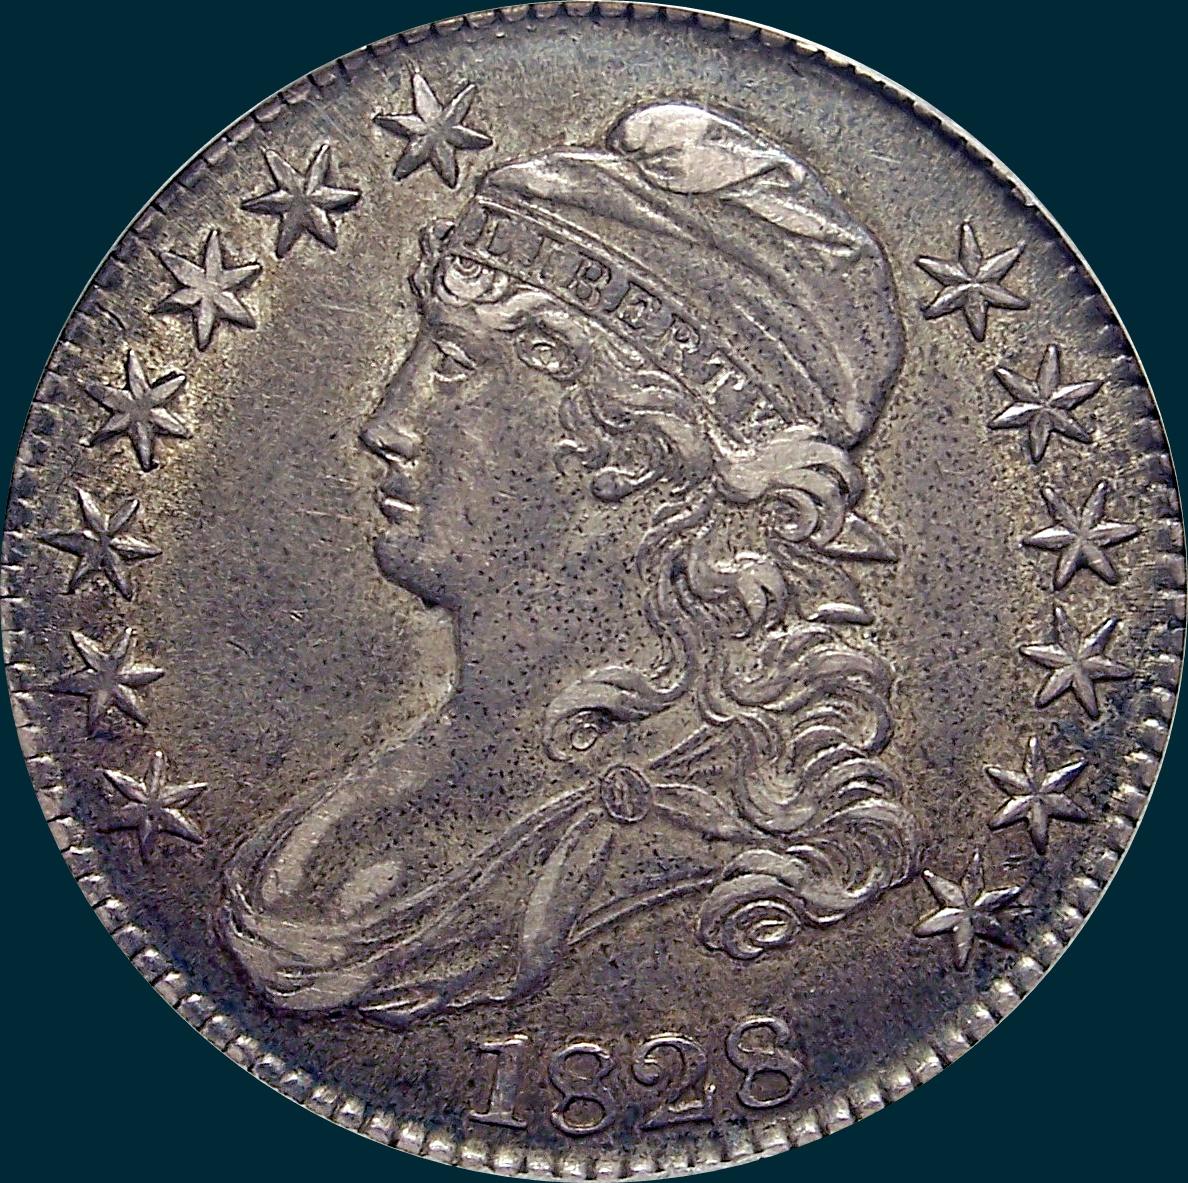 1828 O-119, Small 8's small letters, capped bust half dollar